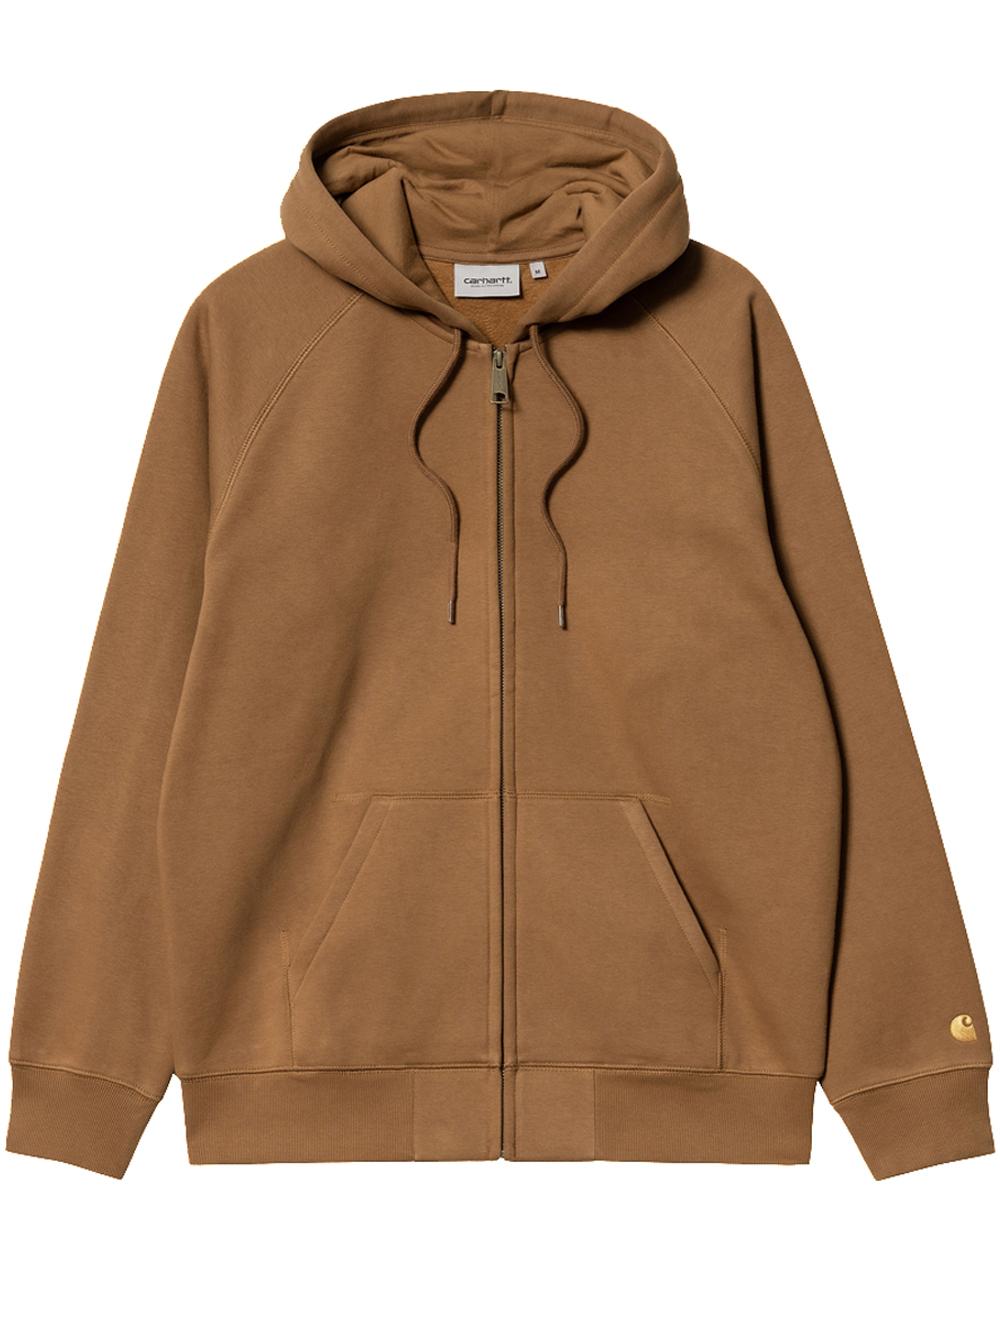 Carhartt Hooded Chase Jacket Brown In Cotton for Men | Lyst